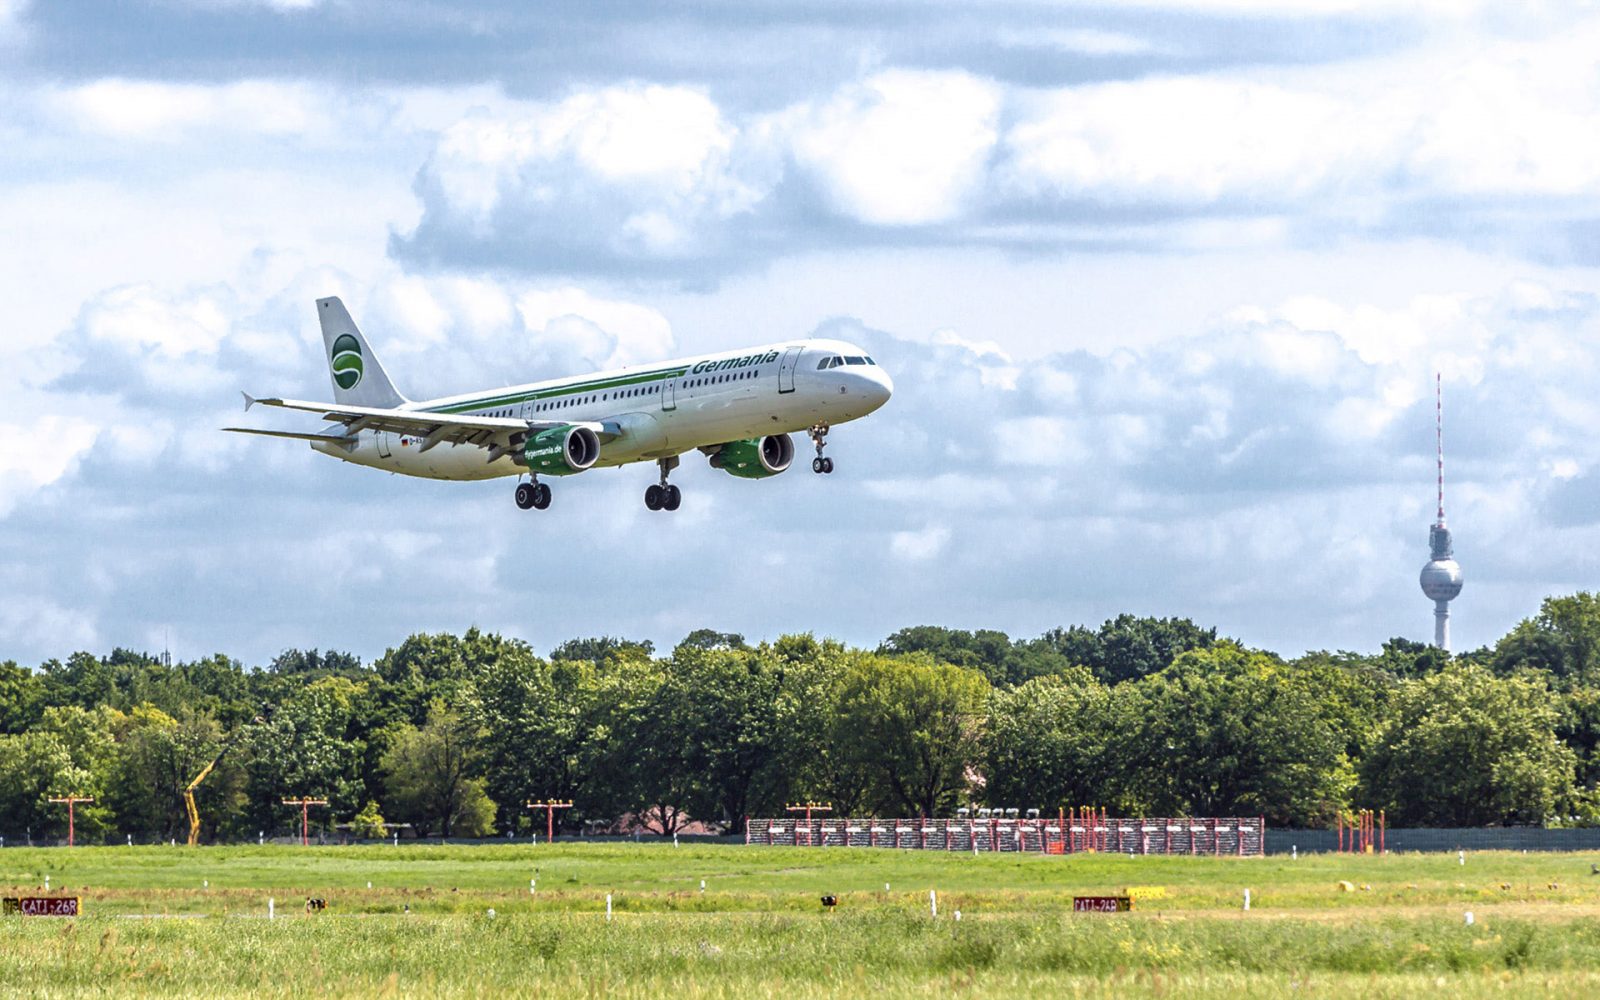 Leisure Airline Germania Becomes Latest Victim in Wave of European Airline Faliures